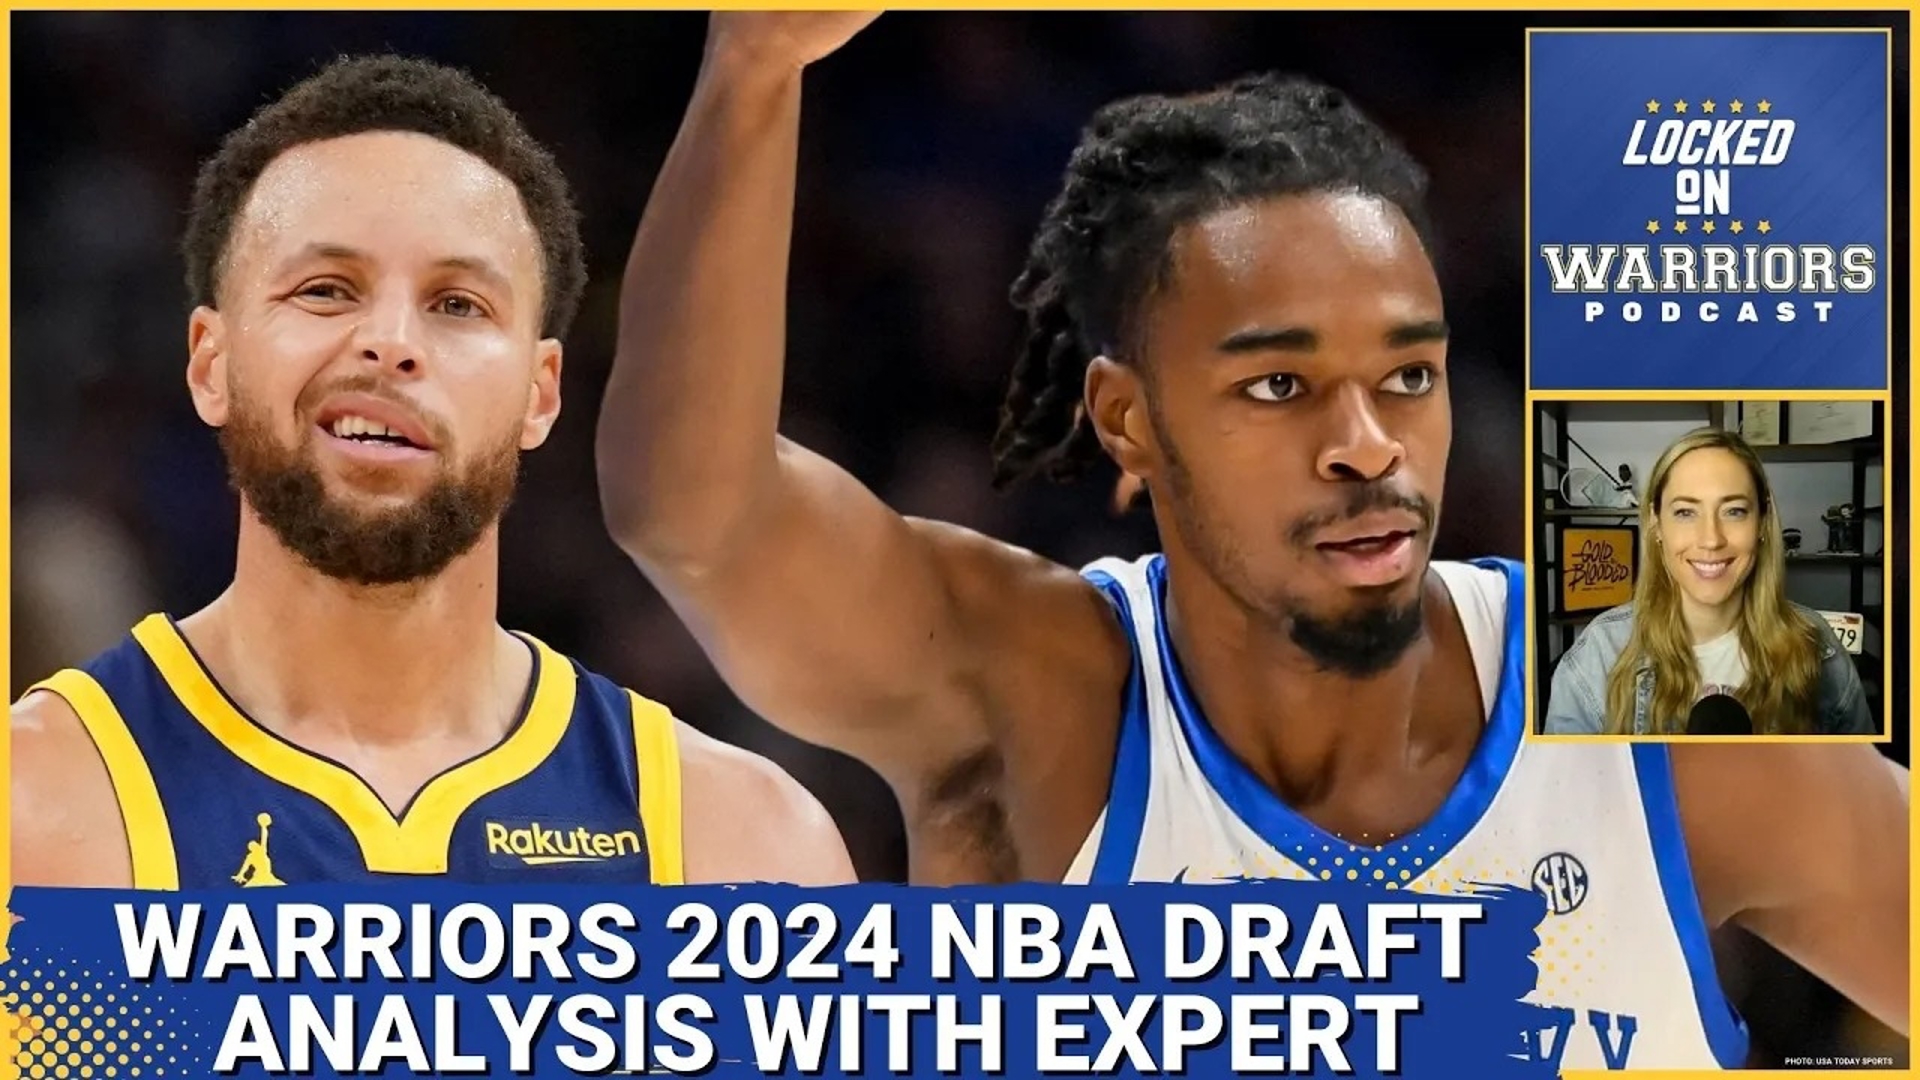 The 2024 NBA draft is less than 2 weeks away, and the Golden State Warriors have the opportunity to bring in another talented young player.